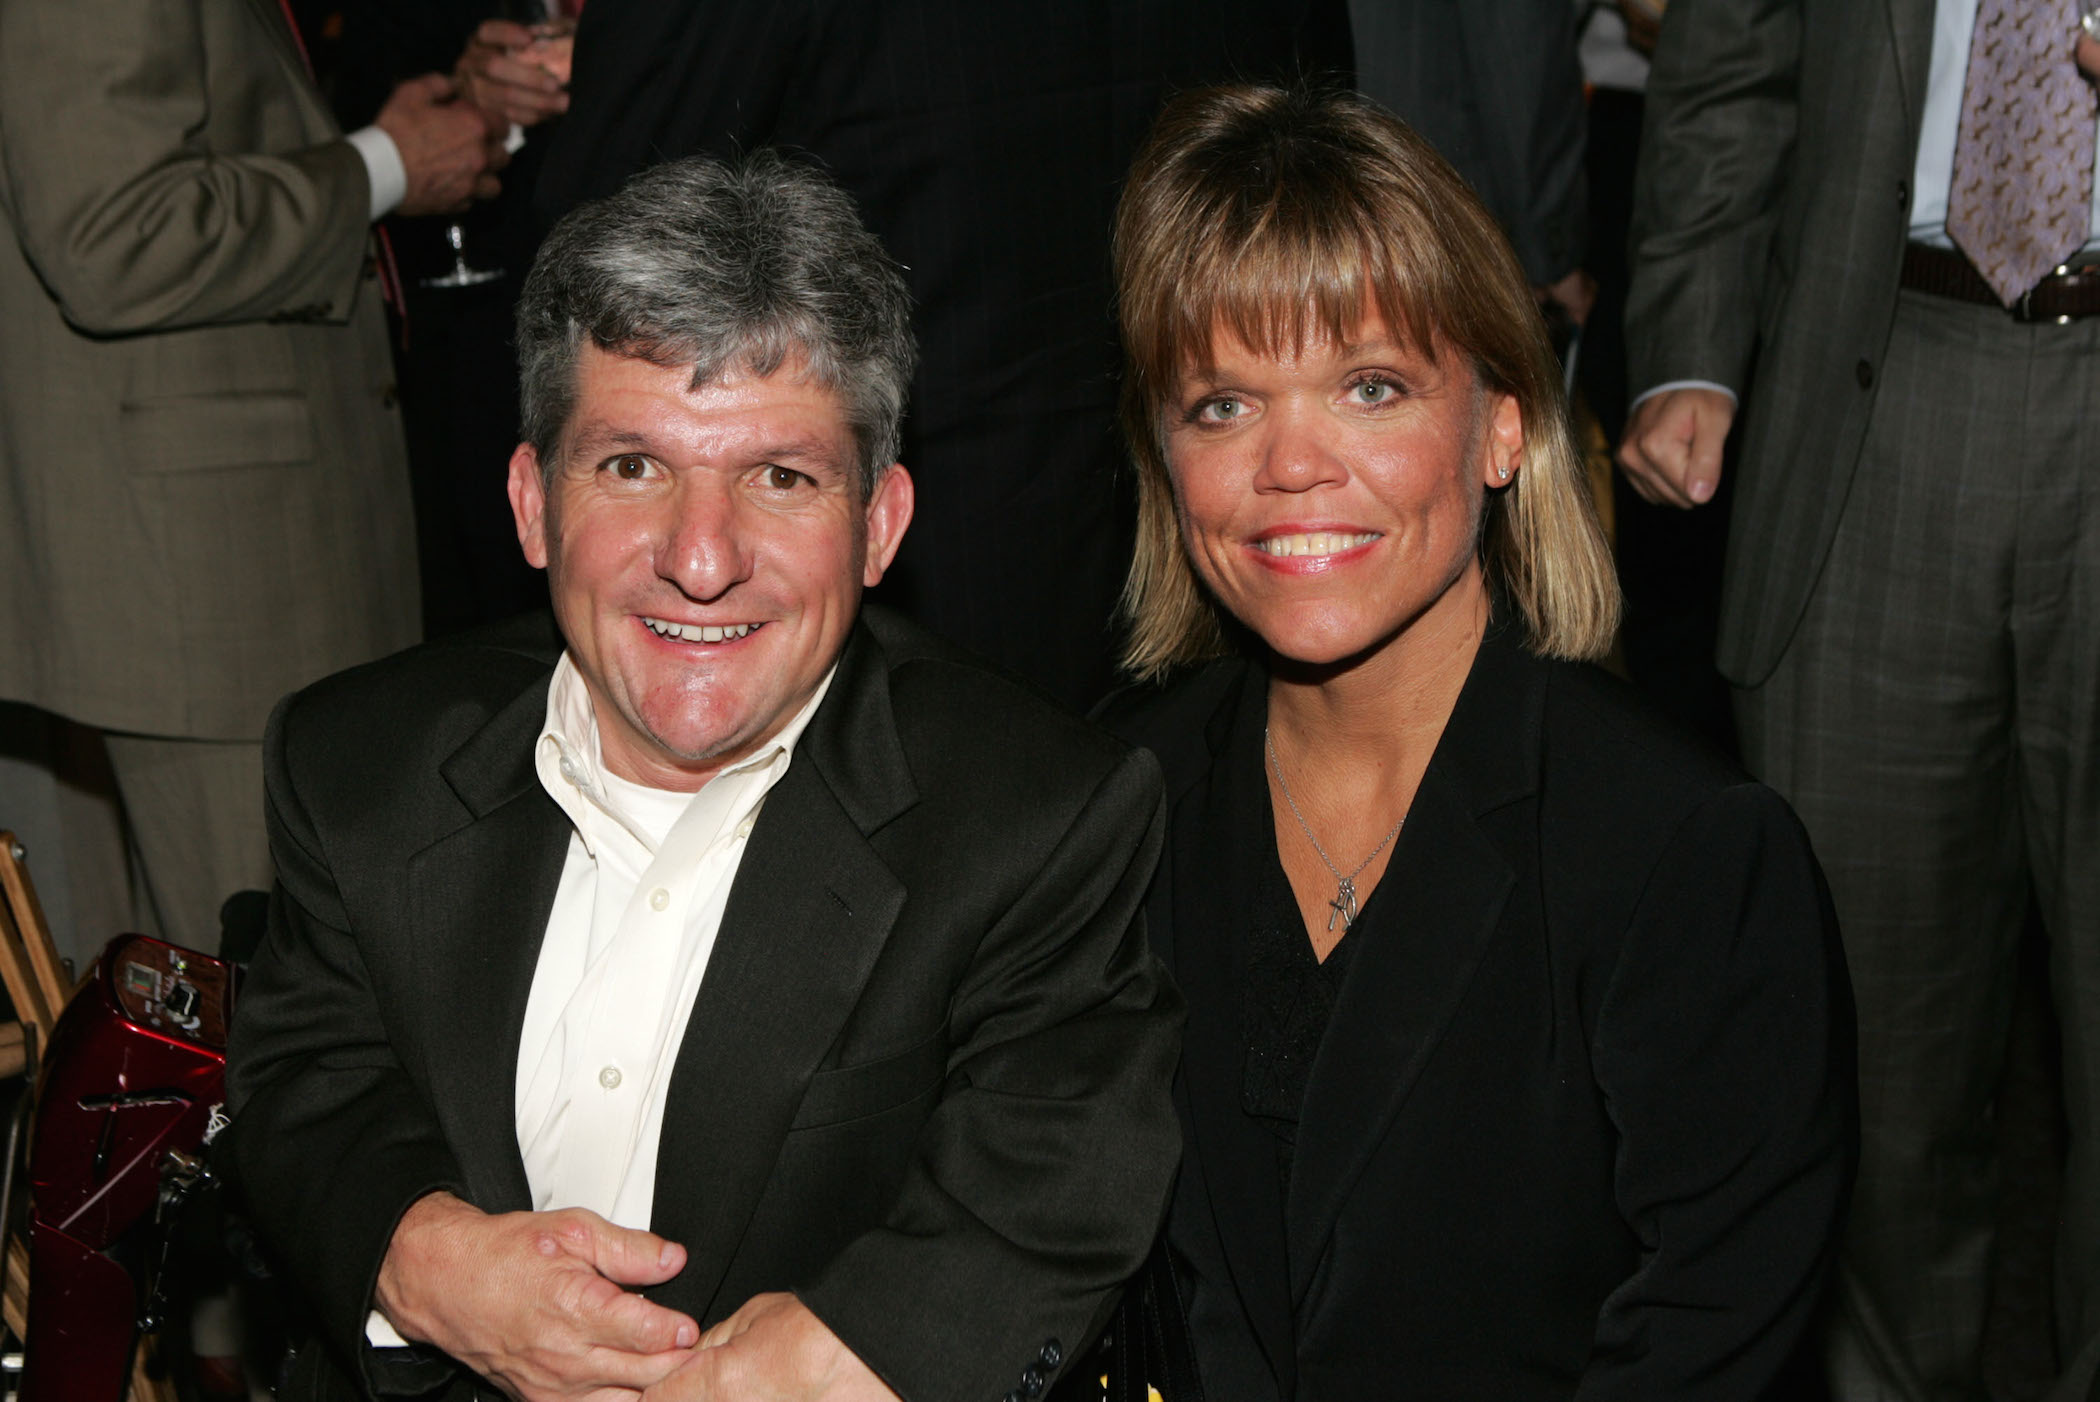 Matt and Amy Roloff from 'Little People, Big World' looking into the camera and smiling